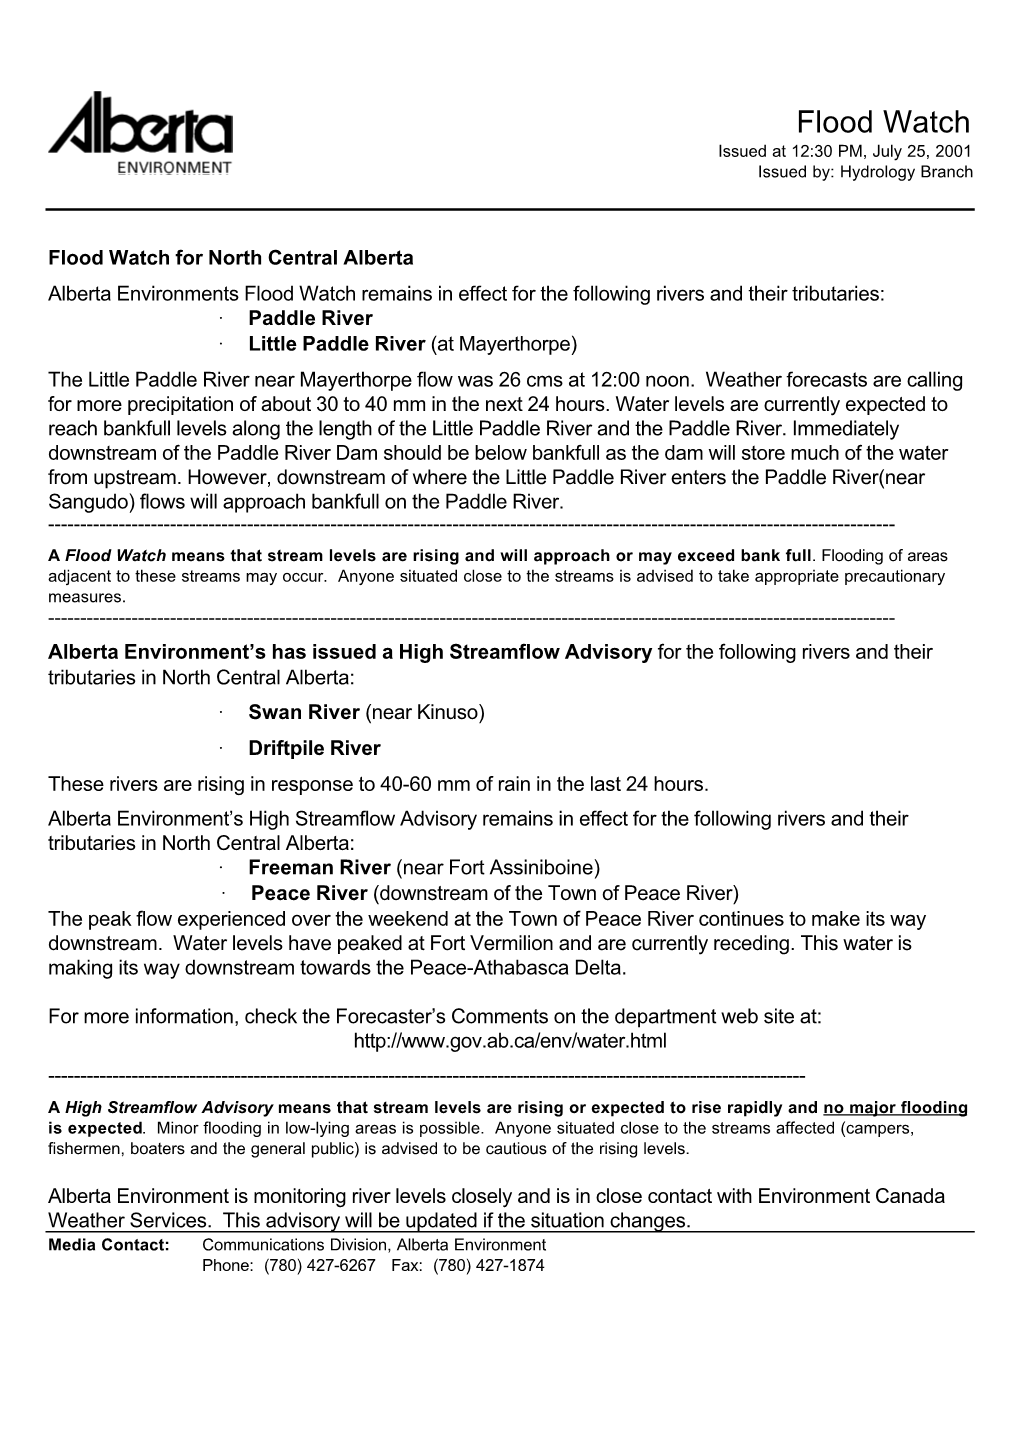 Flood Watch Issued at 12:30 PM, July 25, 2001 Issued By: Hydrology Branch